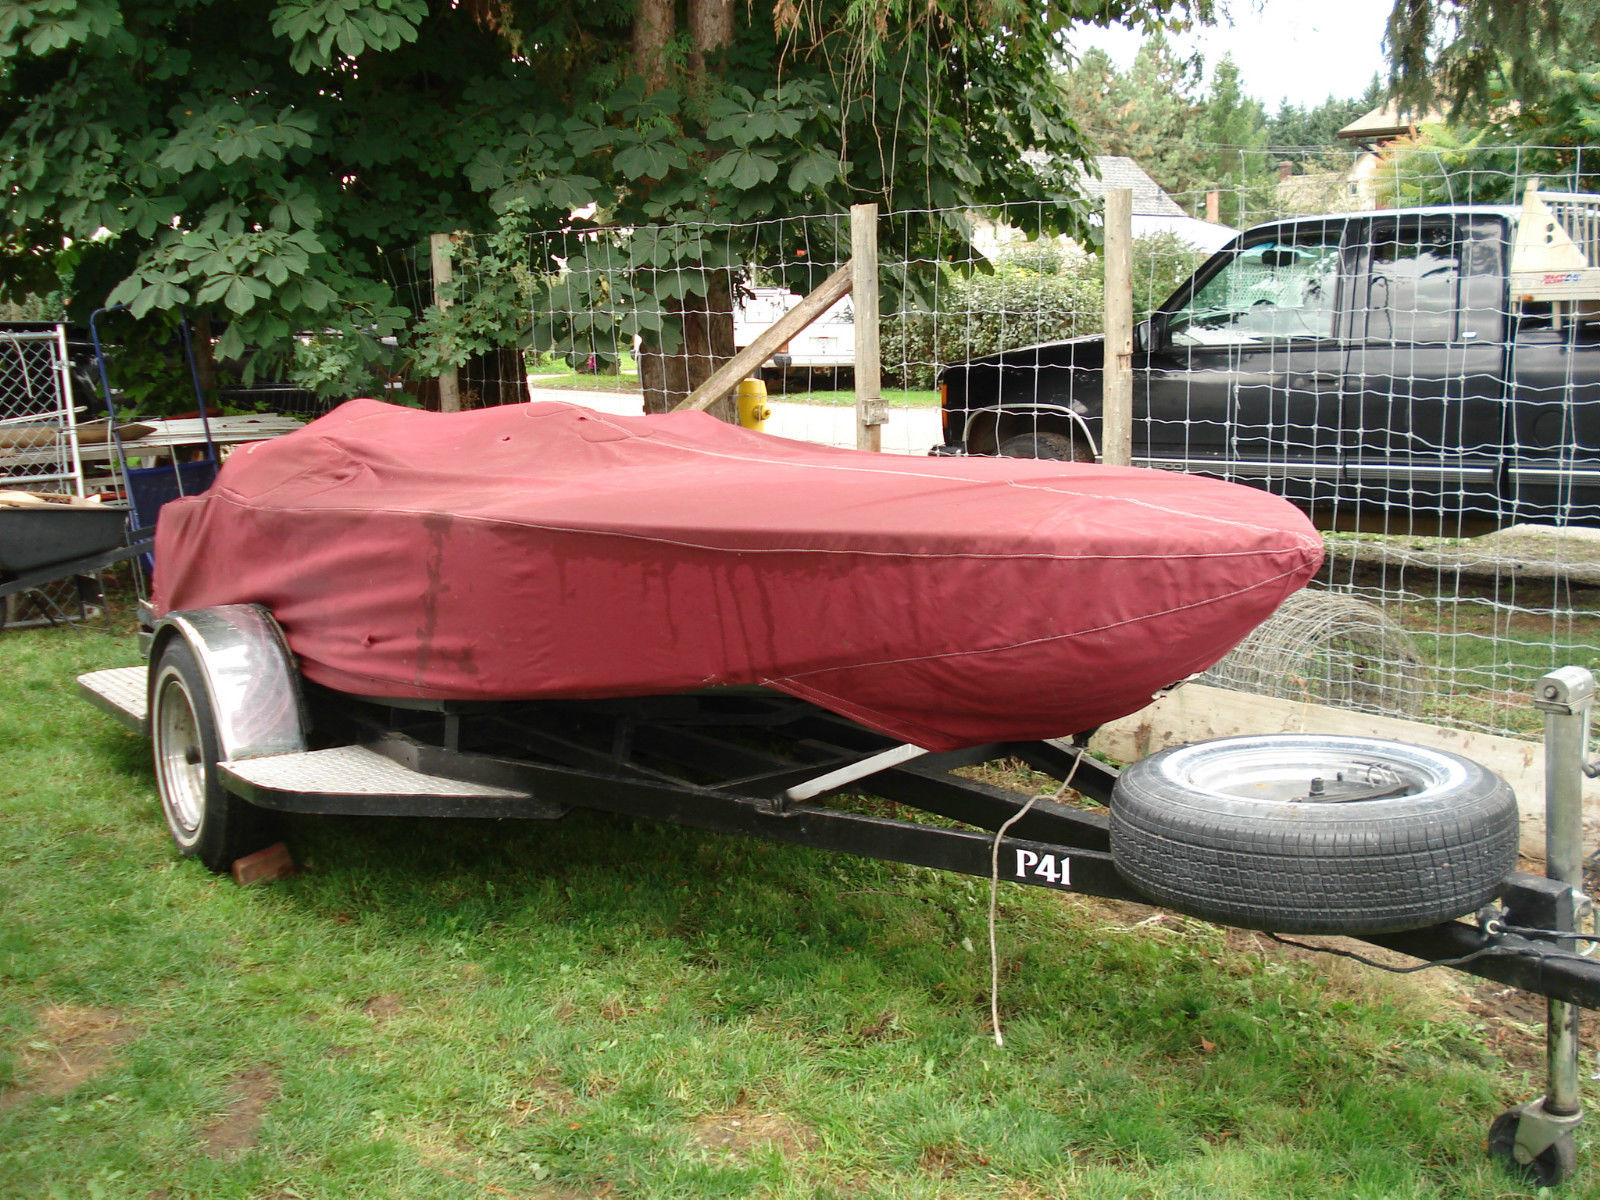 crackerbox racing boat for sale